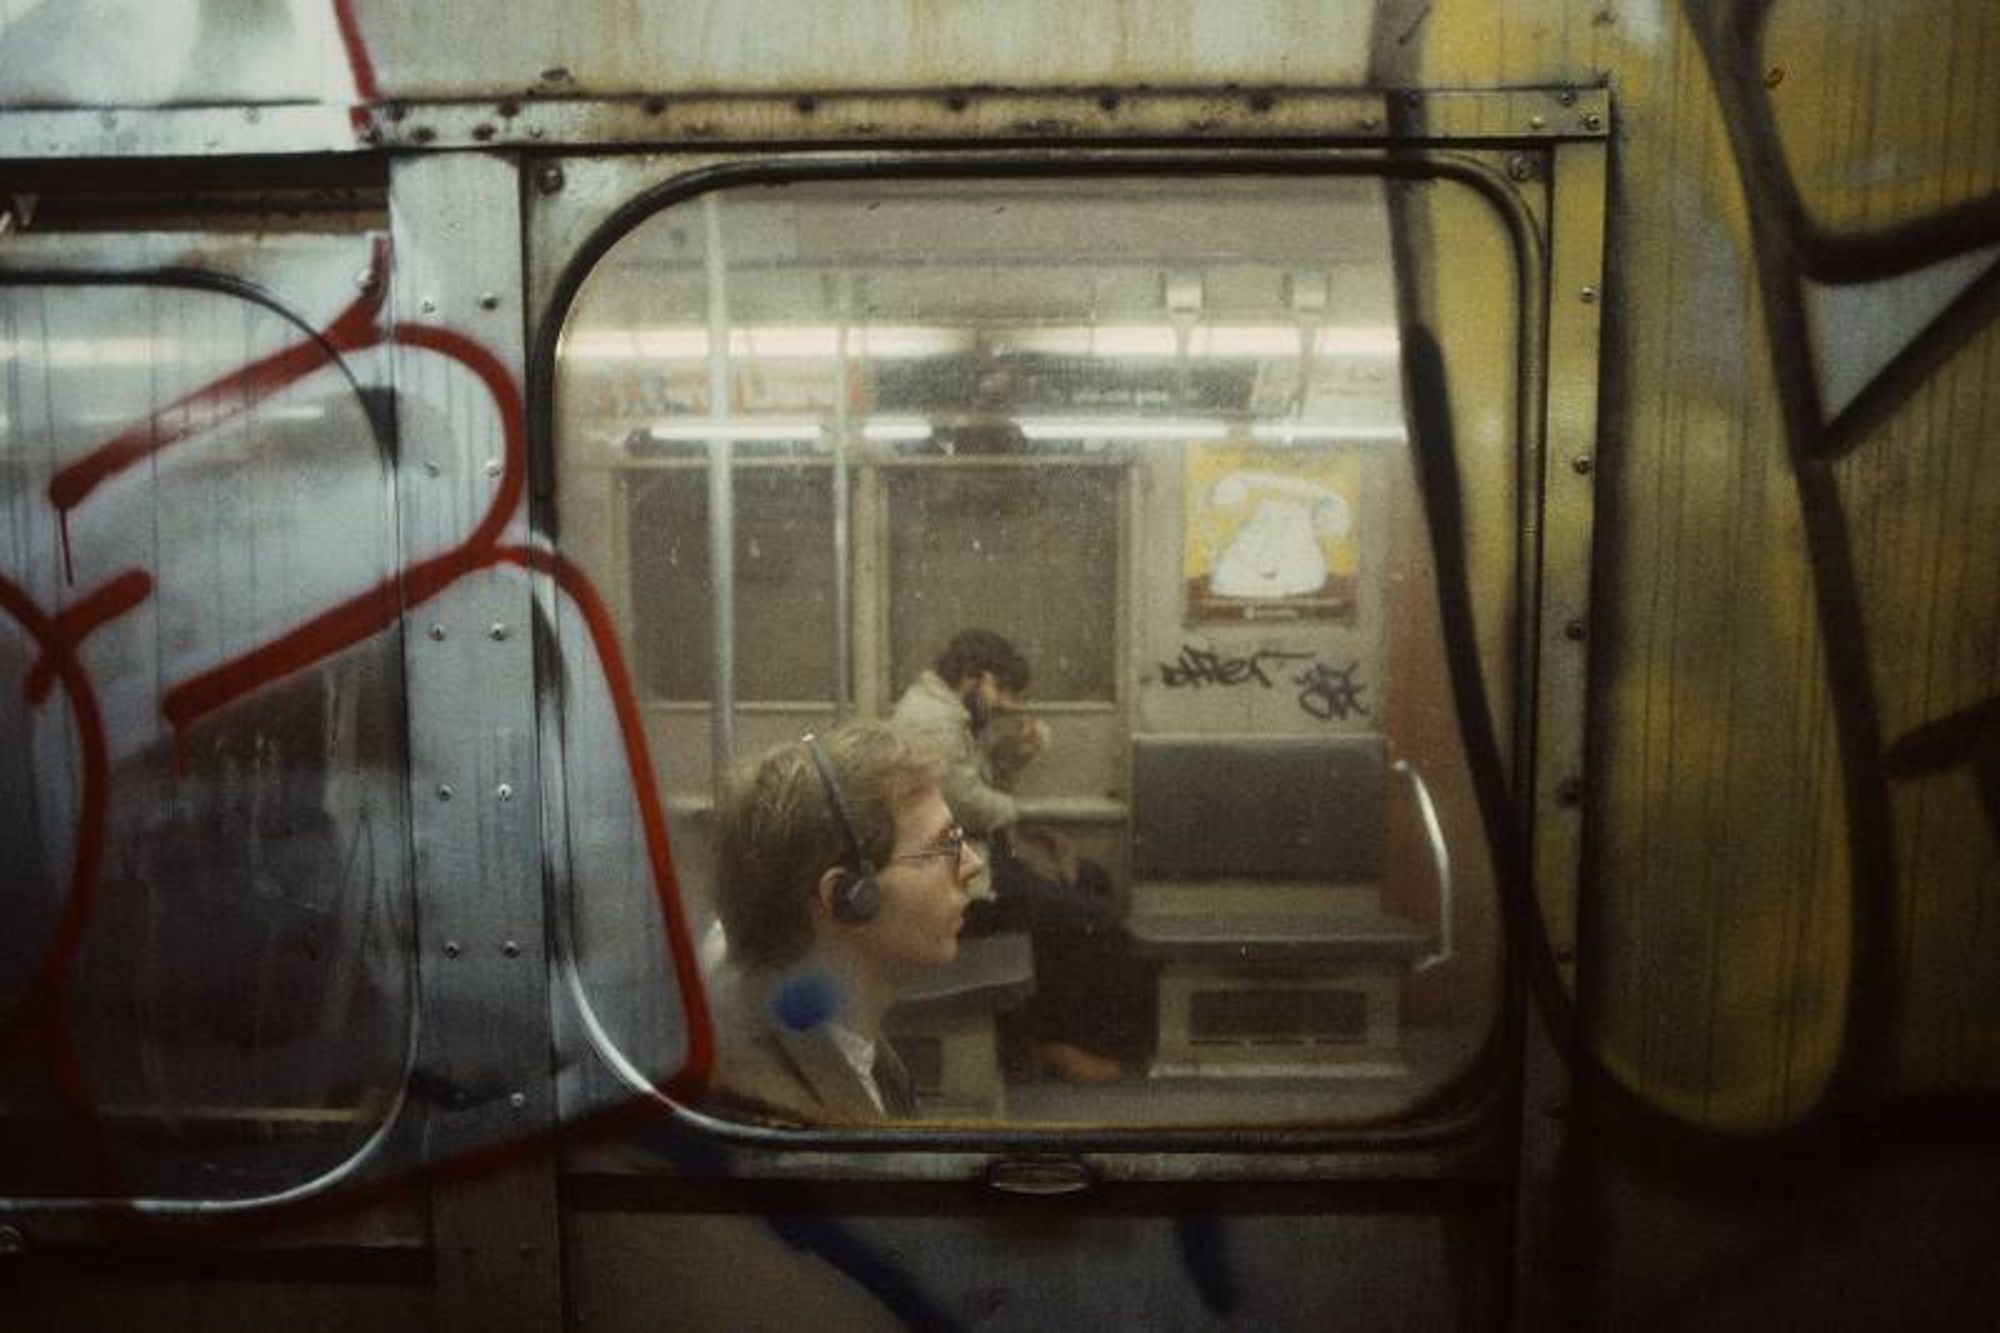 Photo from the subway of a person in another subway car listening to a walkman.